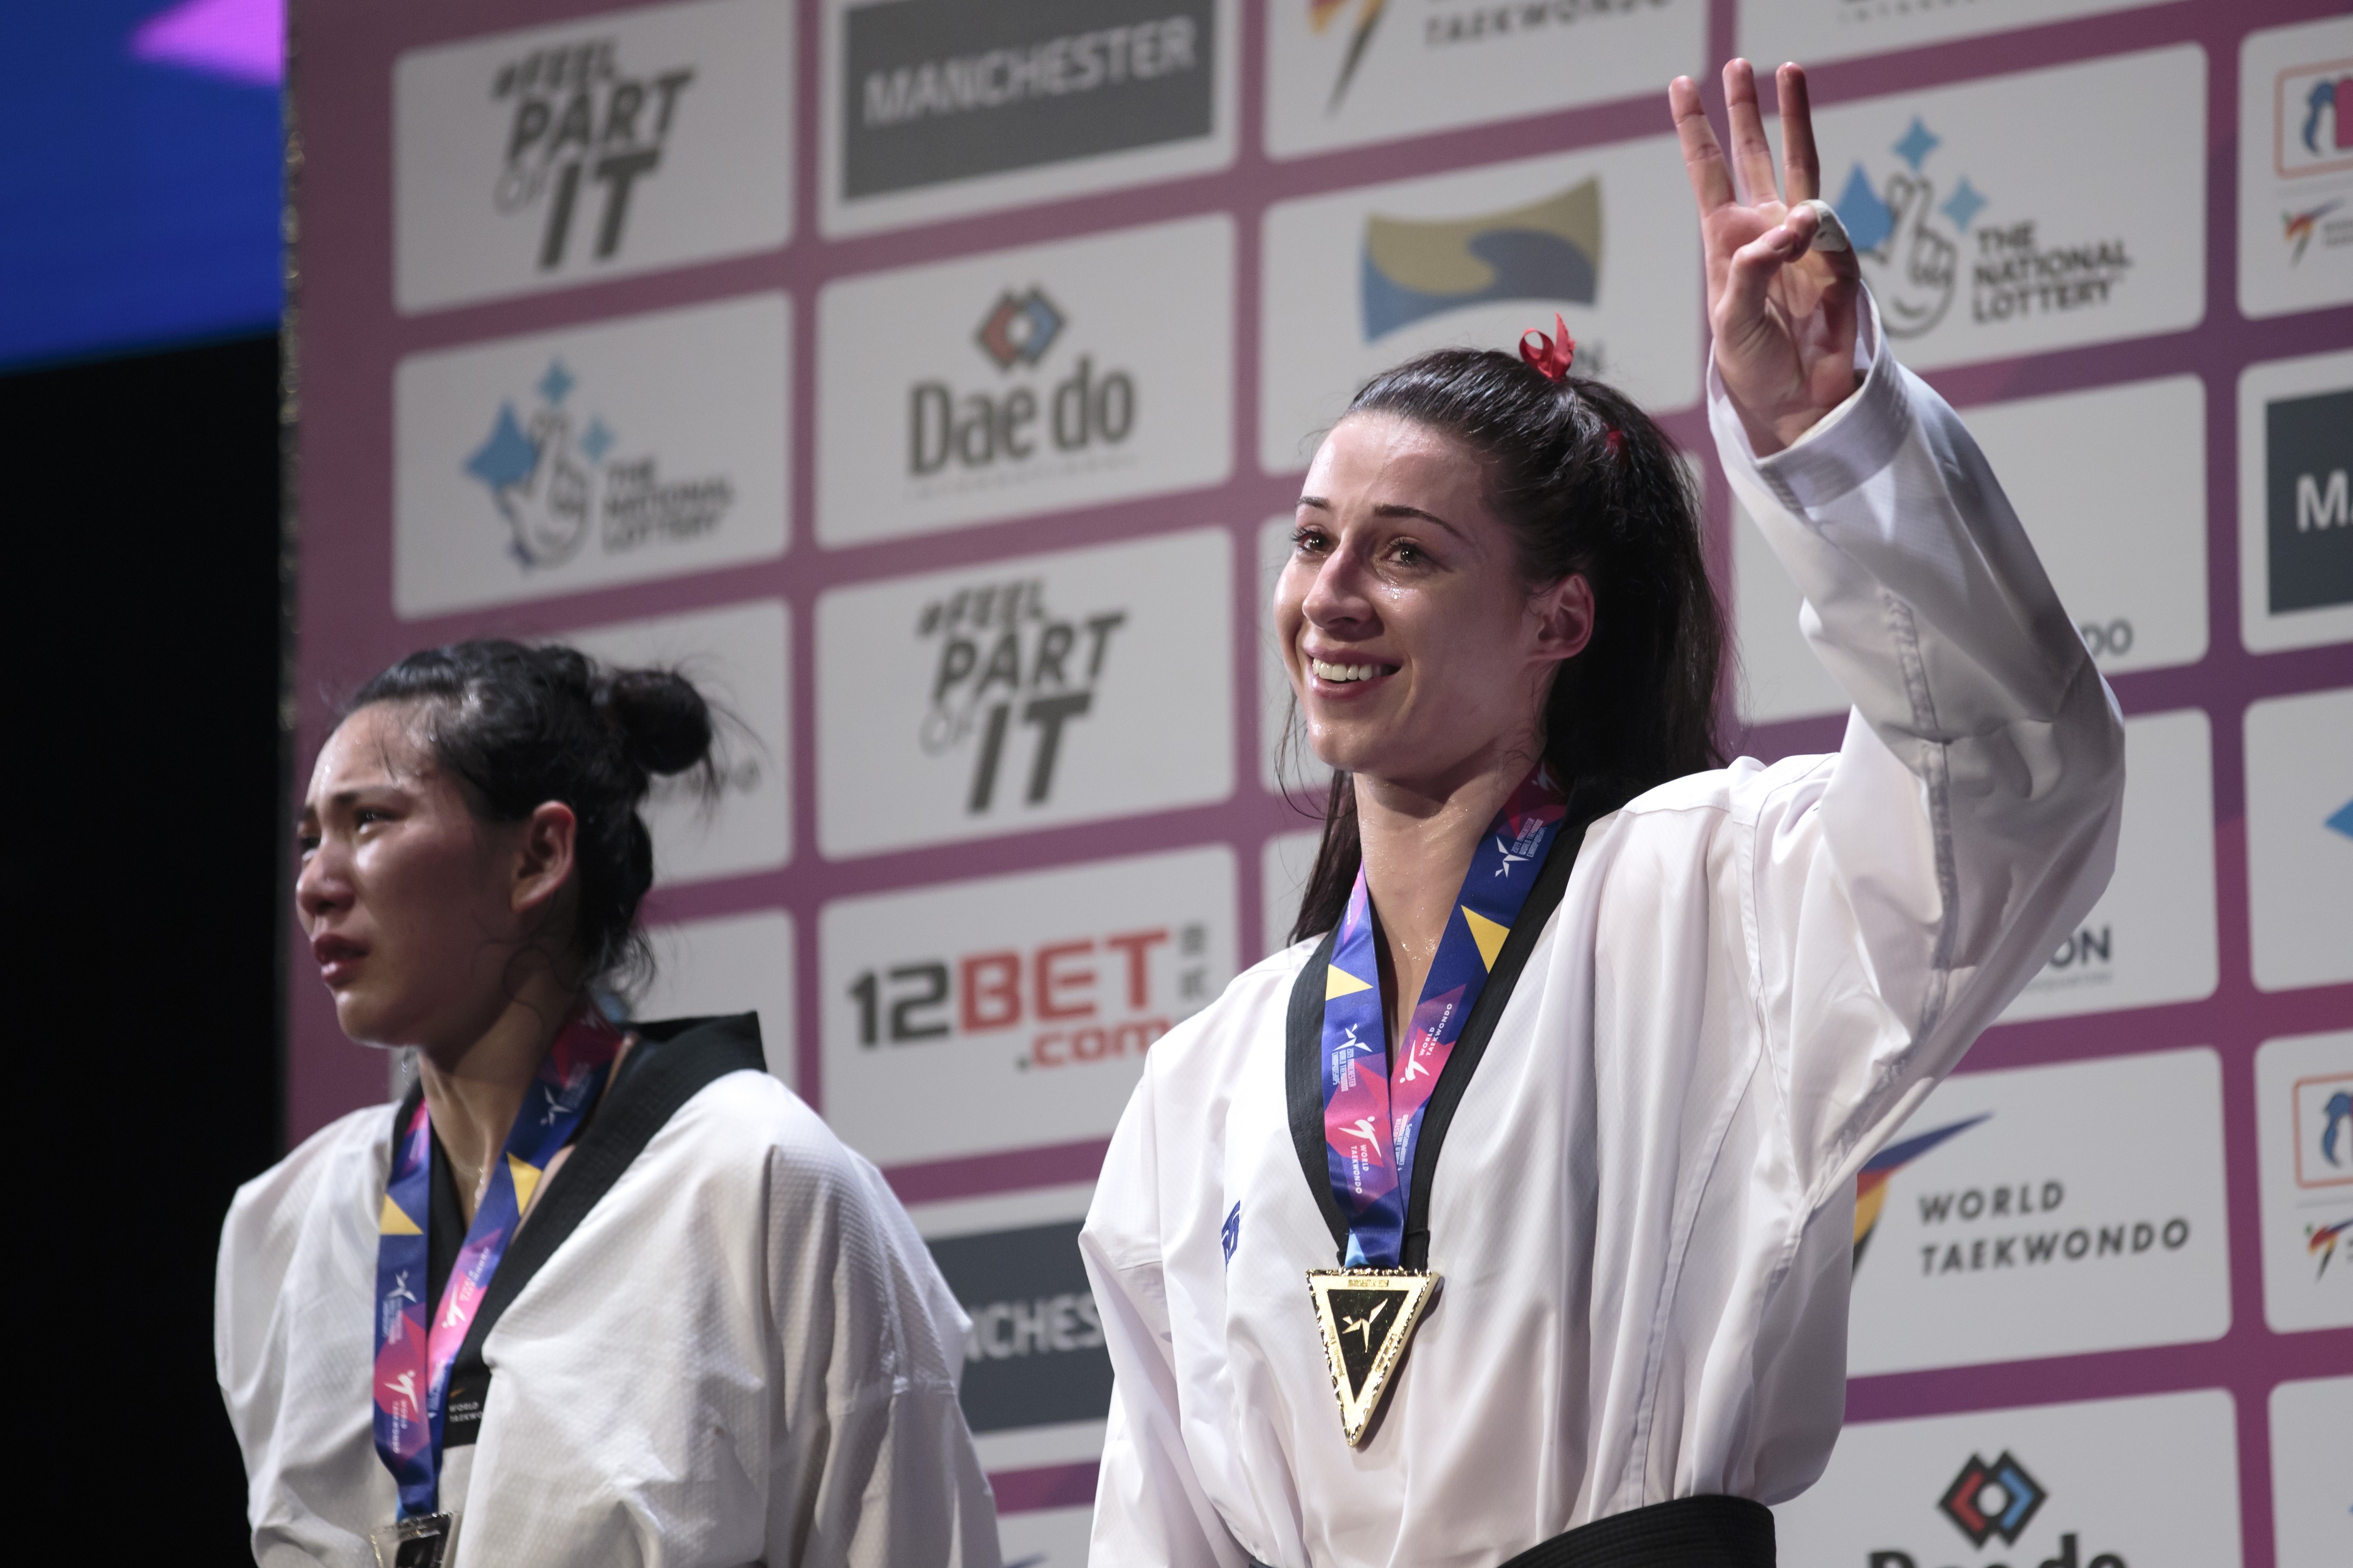 China’s Zheng Shuyin cries as she stands on the podium after being controversially beaten by Britain’s Bianca Walkden in the women’s +73kg final at the World Taekwondo Championships in Manchester. Photos: Xinhua